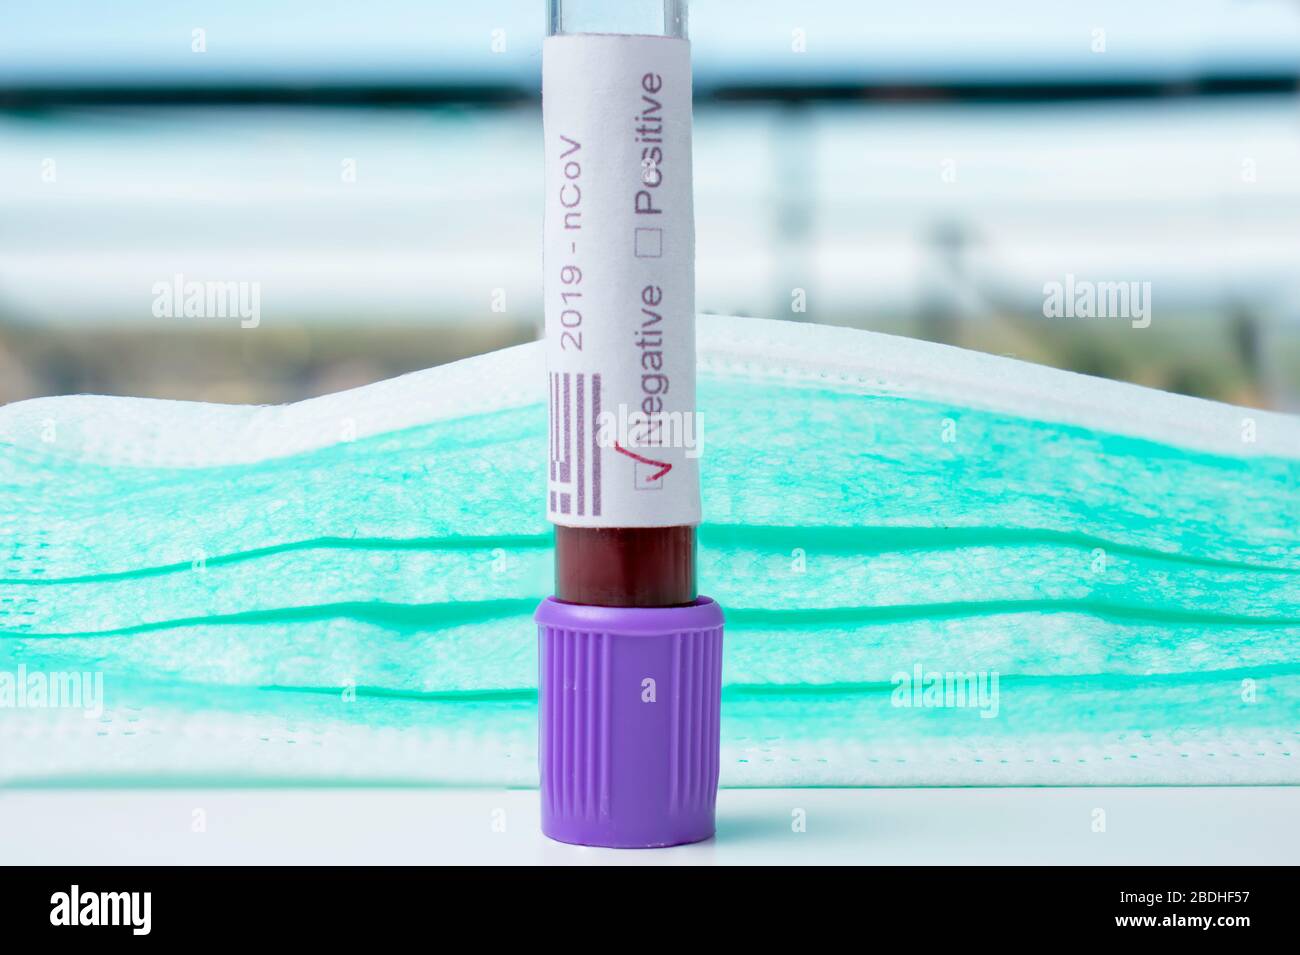 A  blood vial in front of a medical mask. The label on the vial states 2019 n Cov, the words positive negative. It also contains the Greek flag. Stock Photo